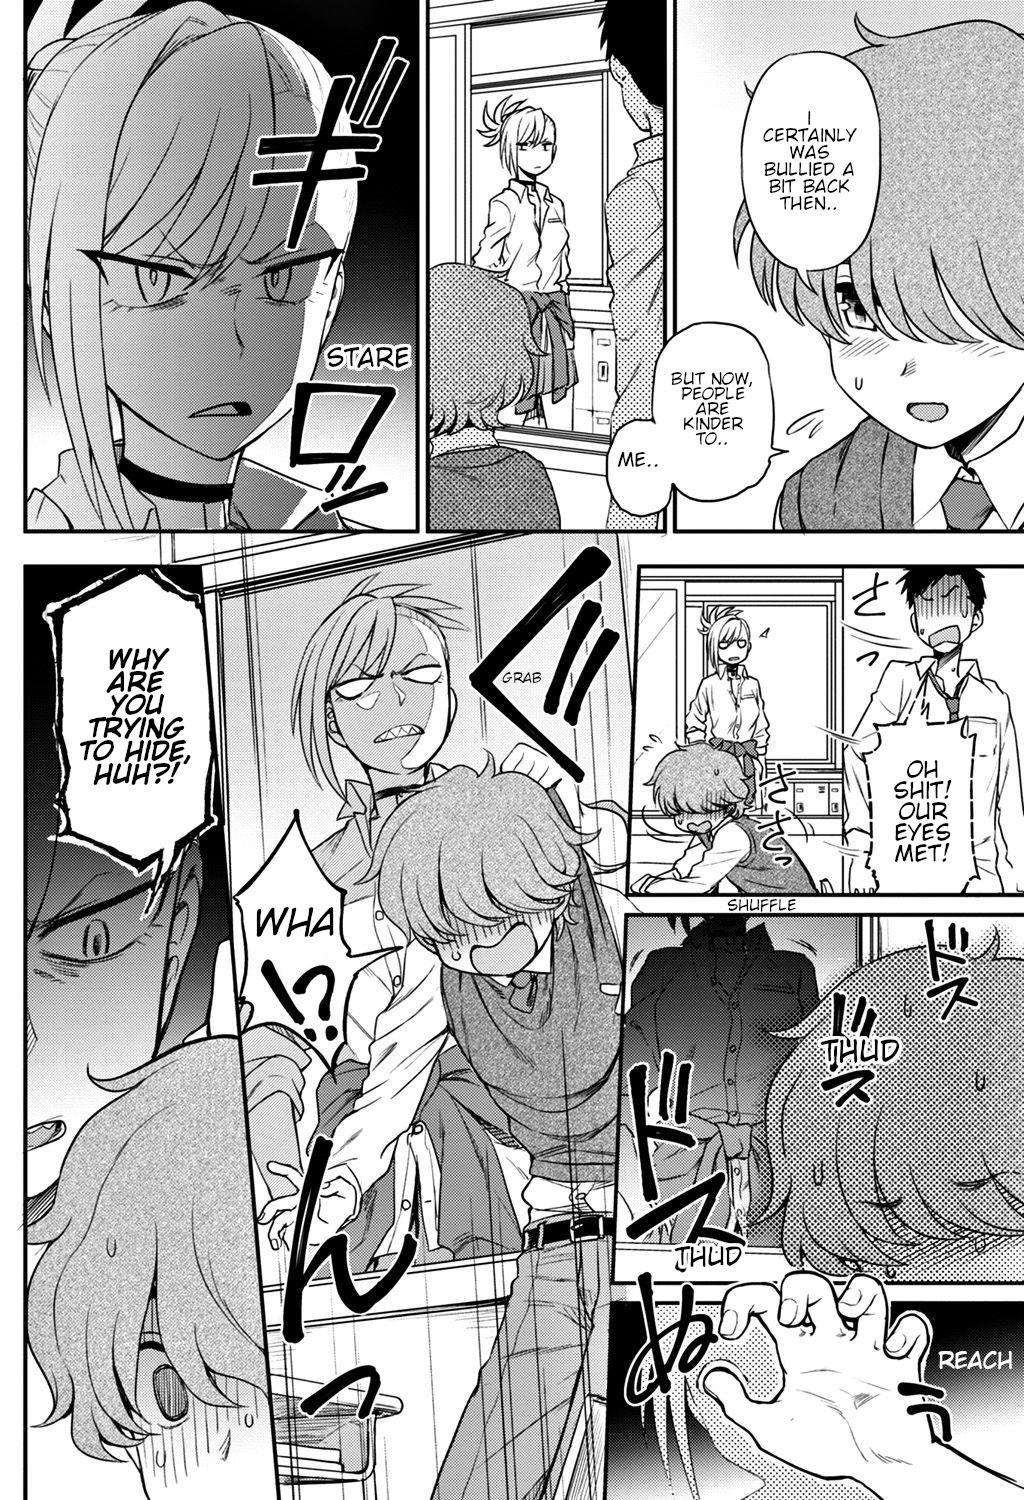 Fake Ijime Ijirare | Bully and the Bullied Gays - Page 2